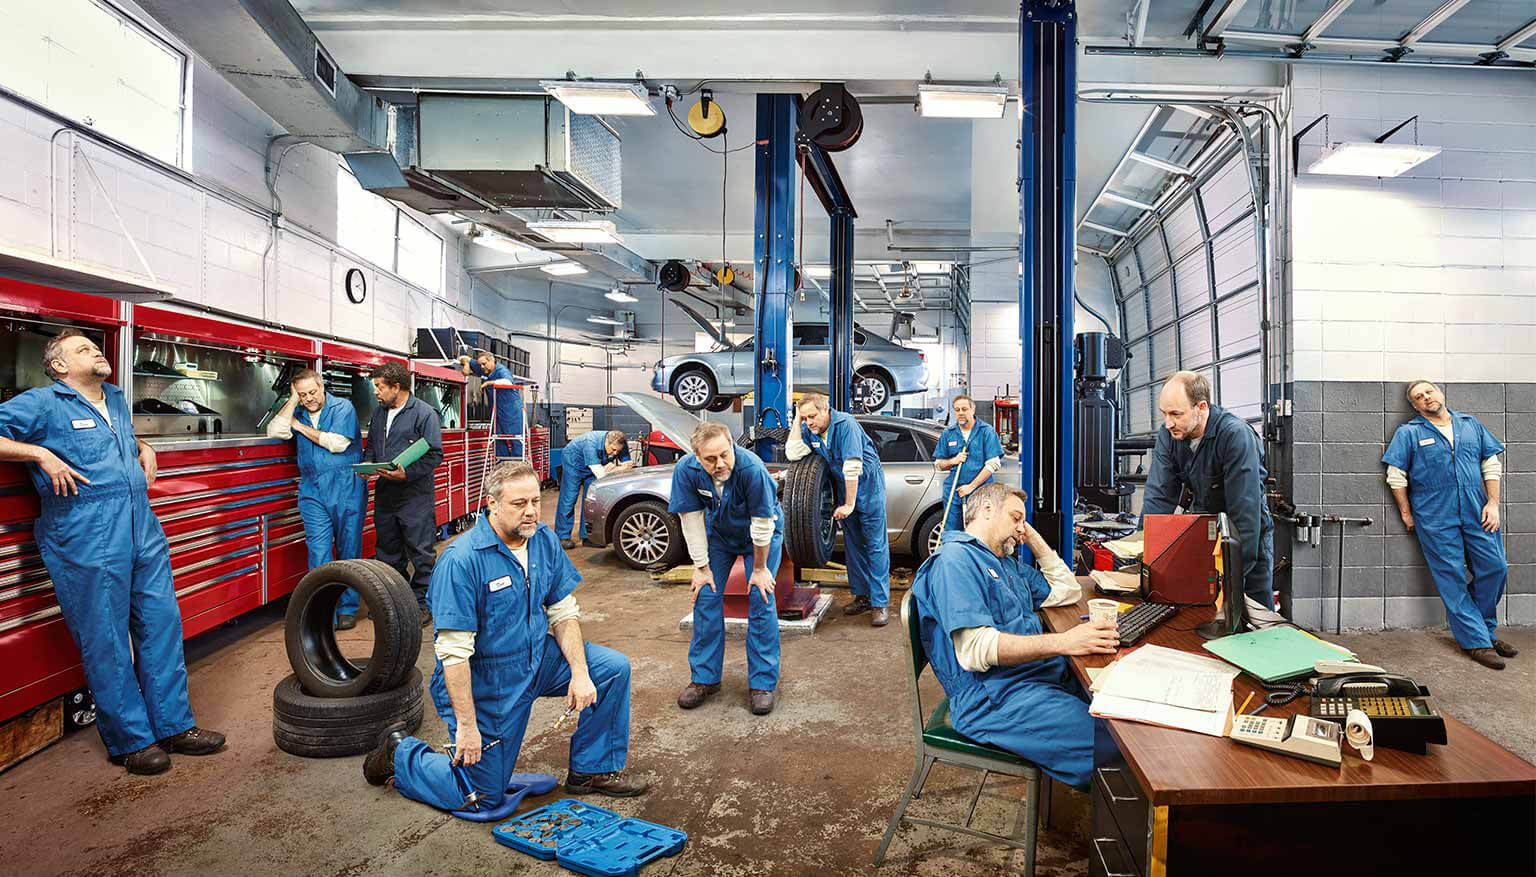 Exhausted mechanic with adult NTM pictured throughout the day at the garage